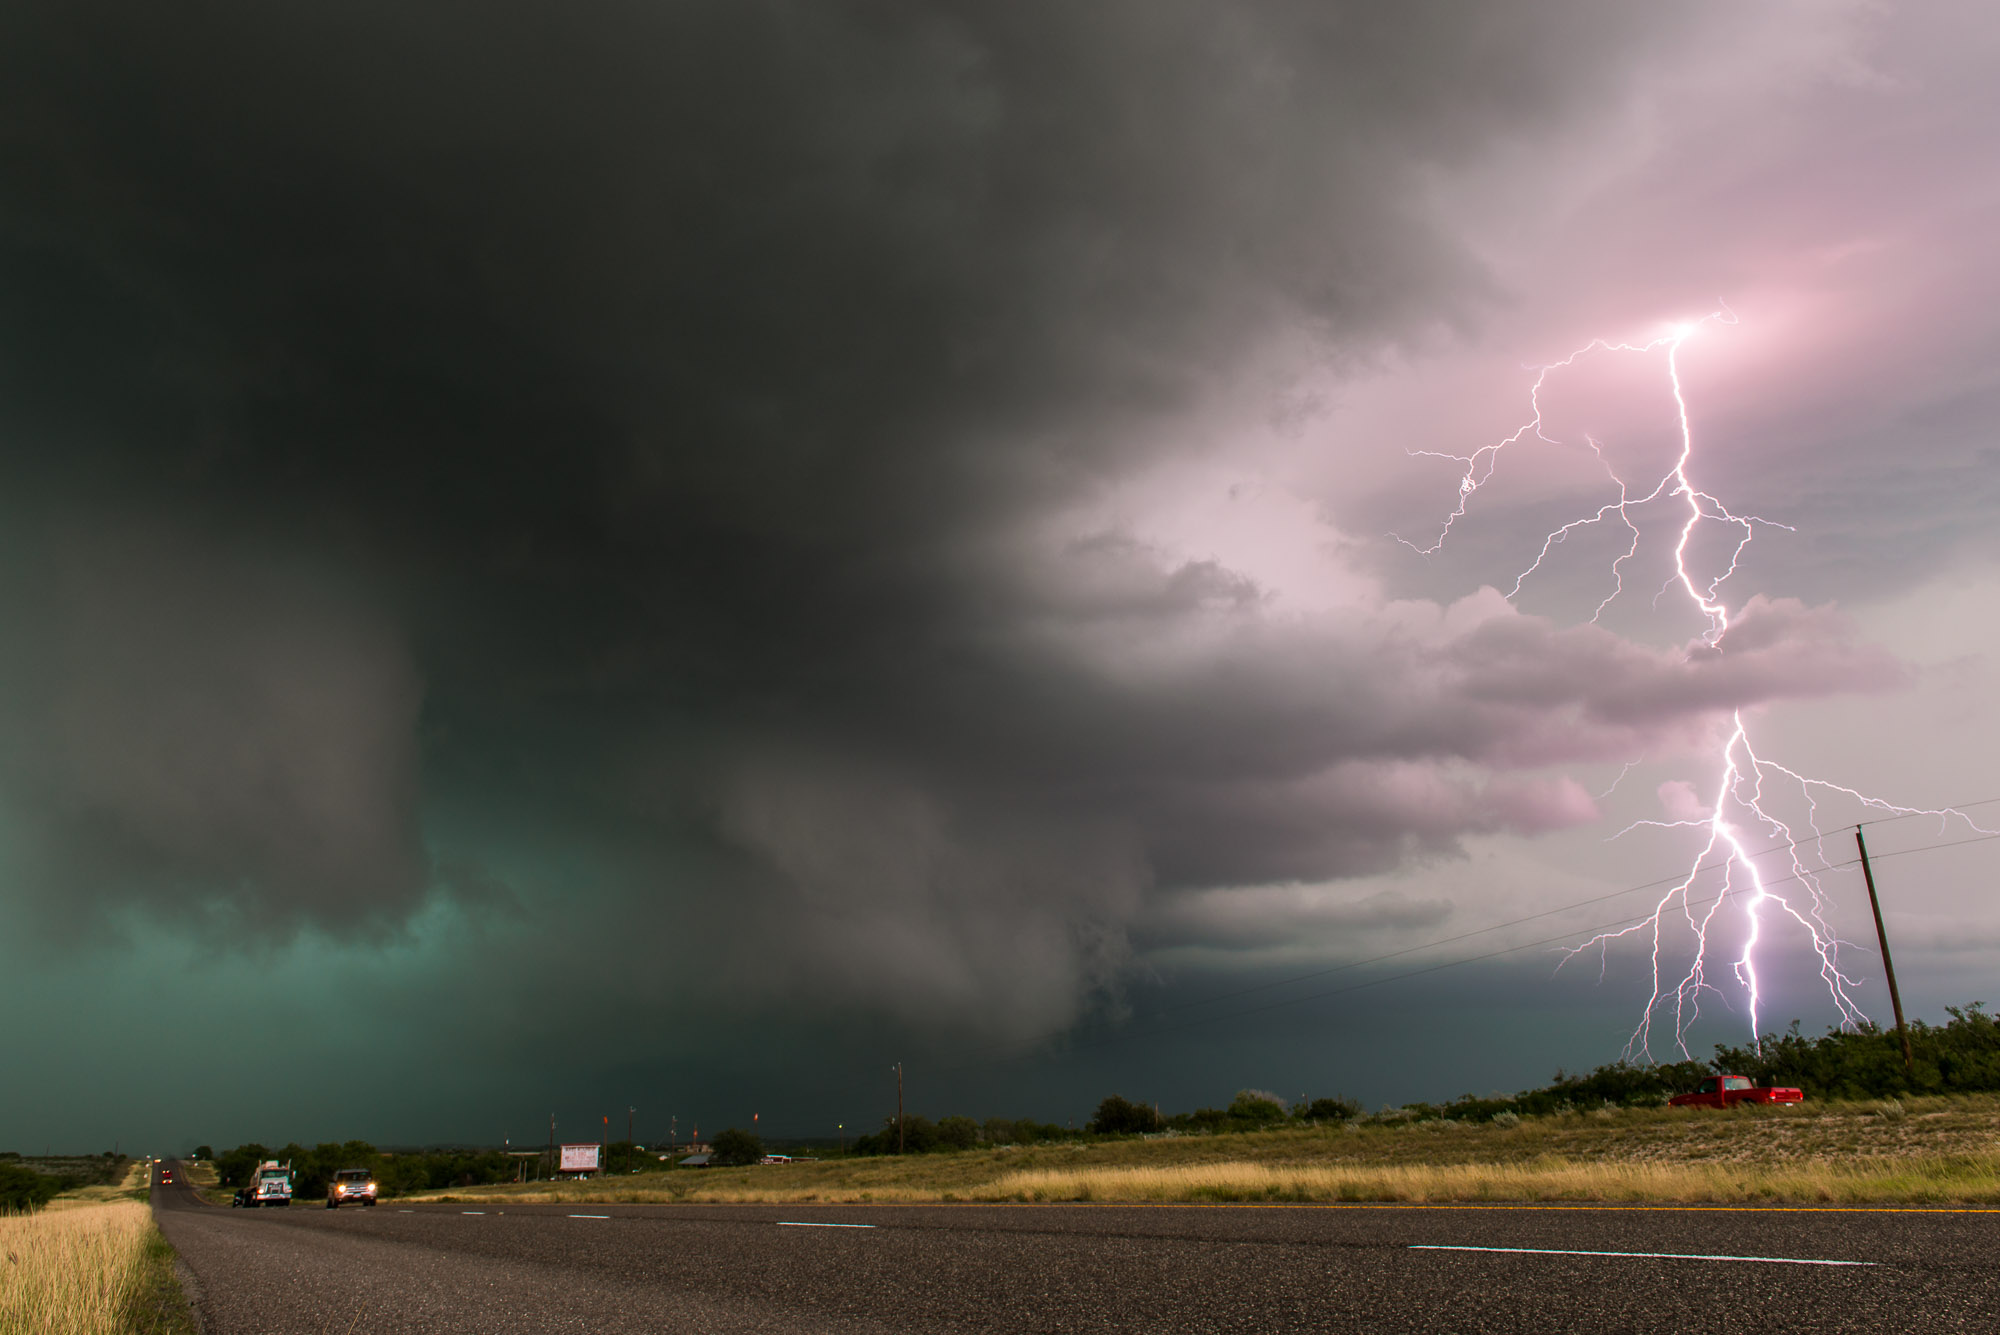 Lightning and hail storm - Alice, Texas - Fred Wasmer Photography